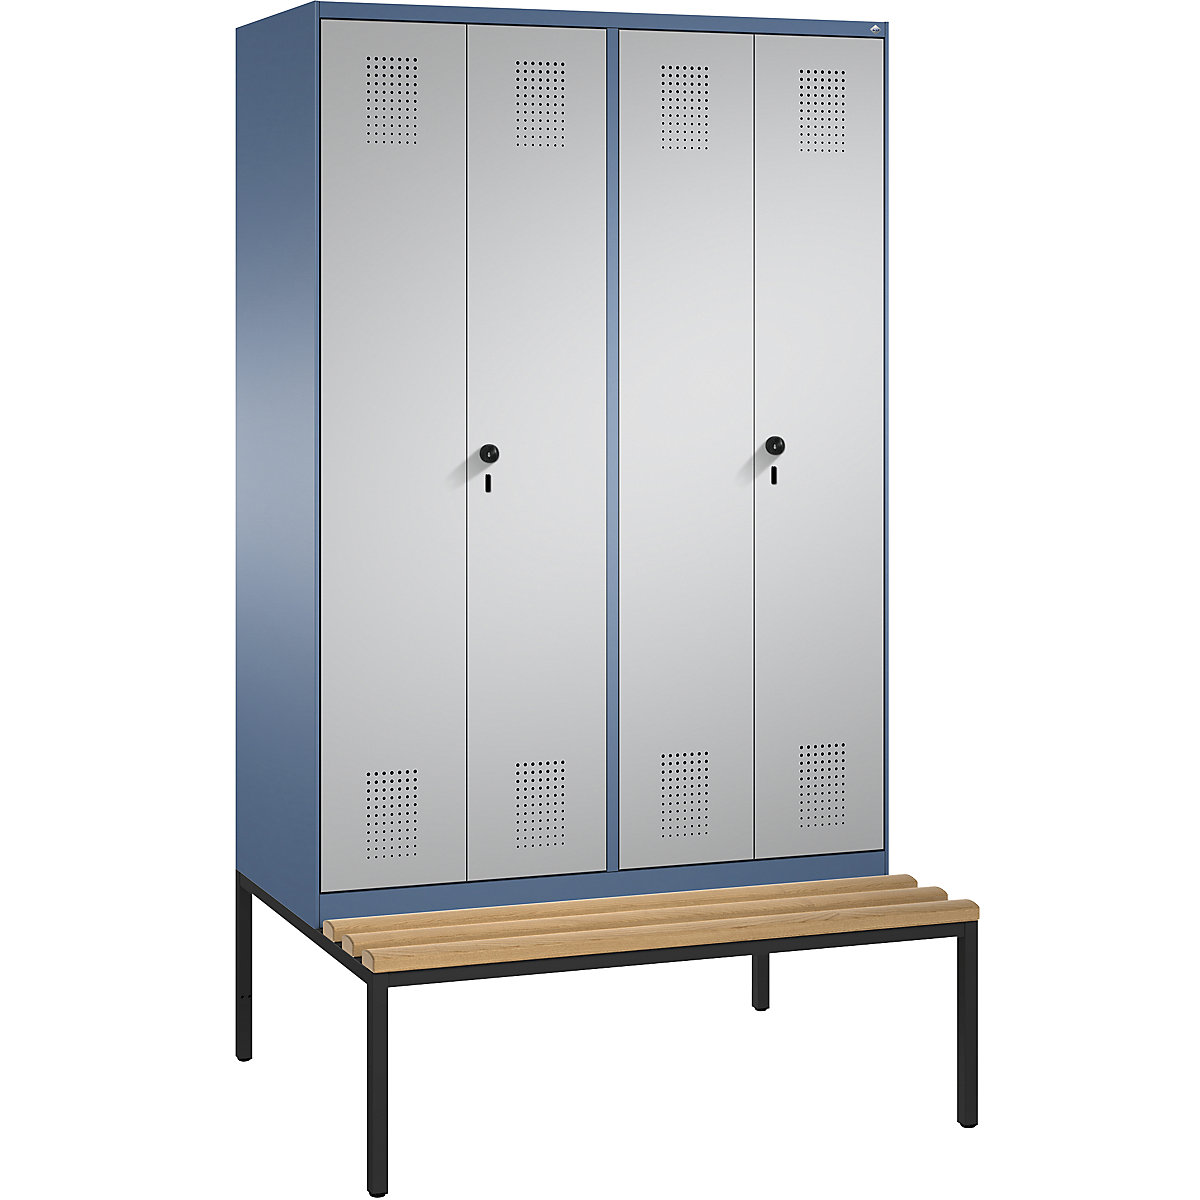 EVOLO cloakroom locker, doors close in the middle, with bench – C+P